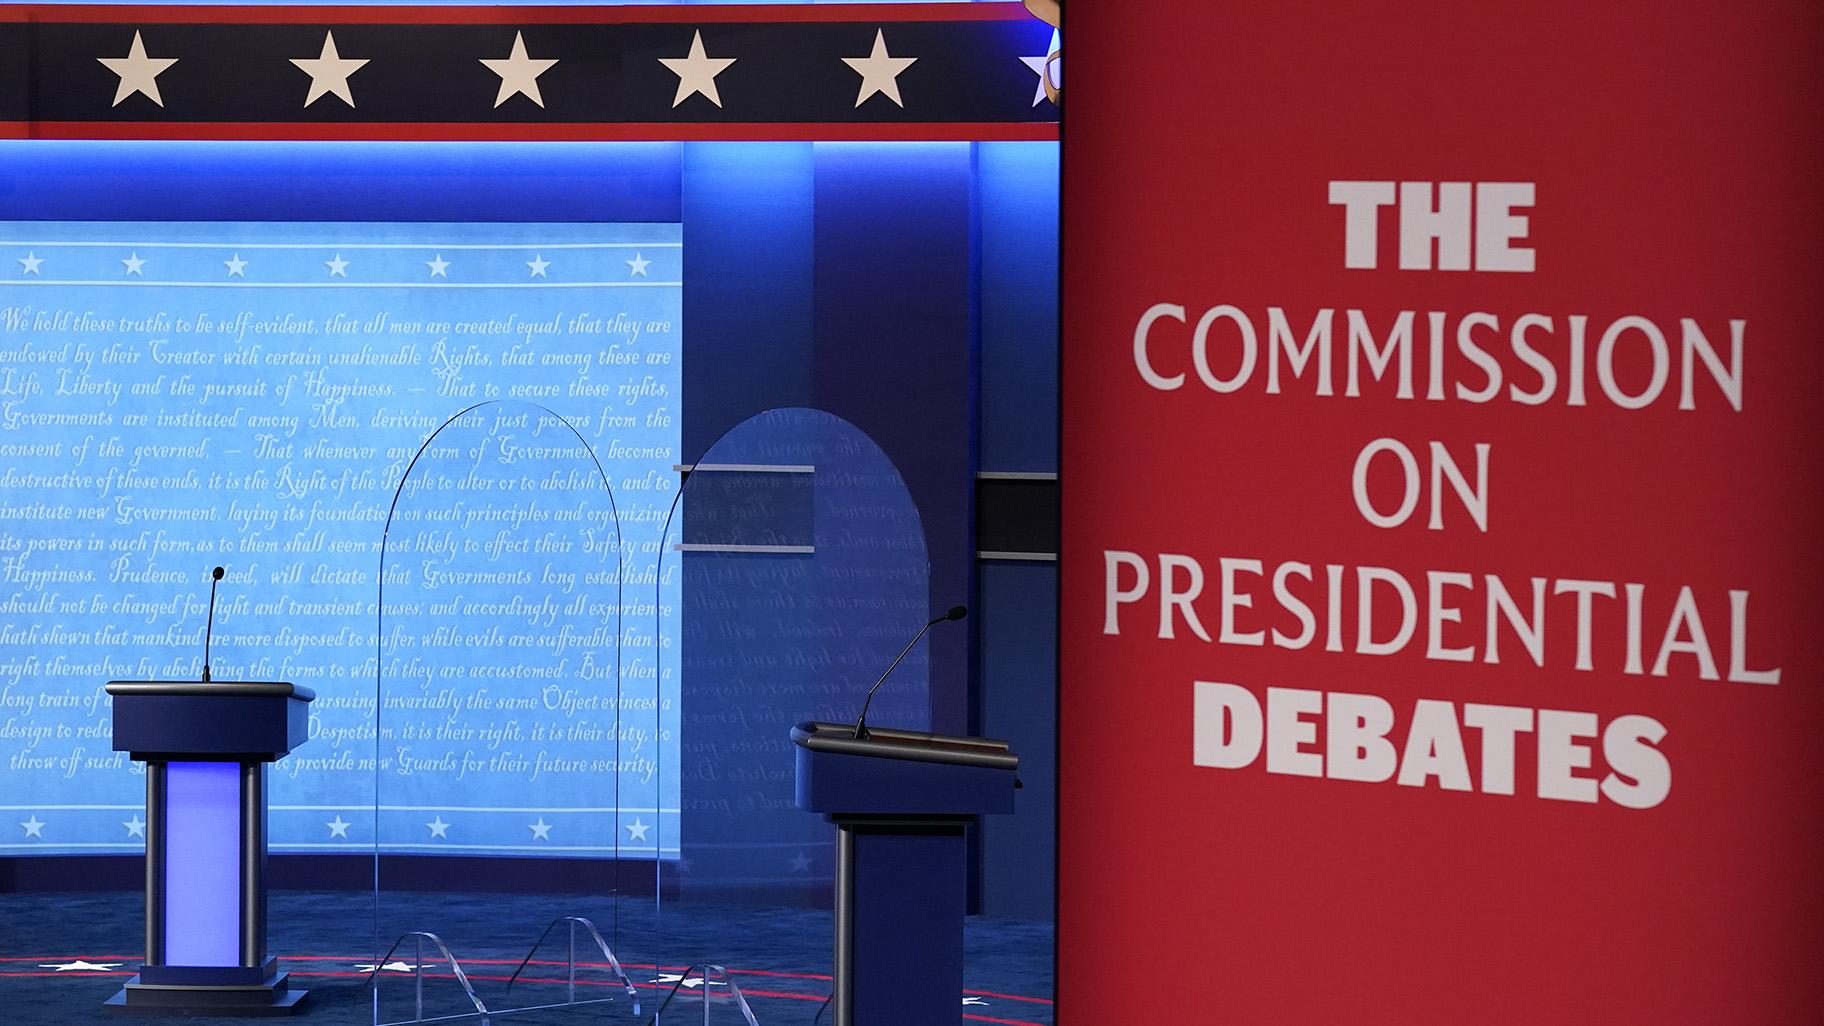 Clear protective panels stand onstage between lecterns as preparations take place for the second Presidential debate at Belmont University, Oct. 21, 2020, in Nashville, Tenn. (AP Photo / Patrick Semansky, File)